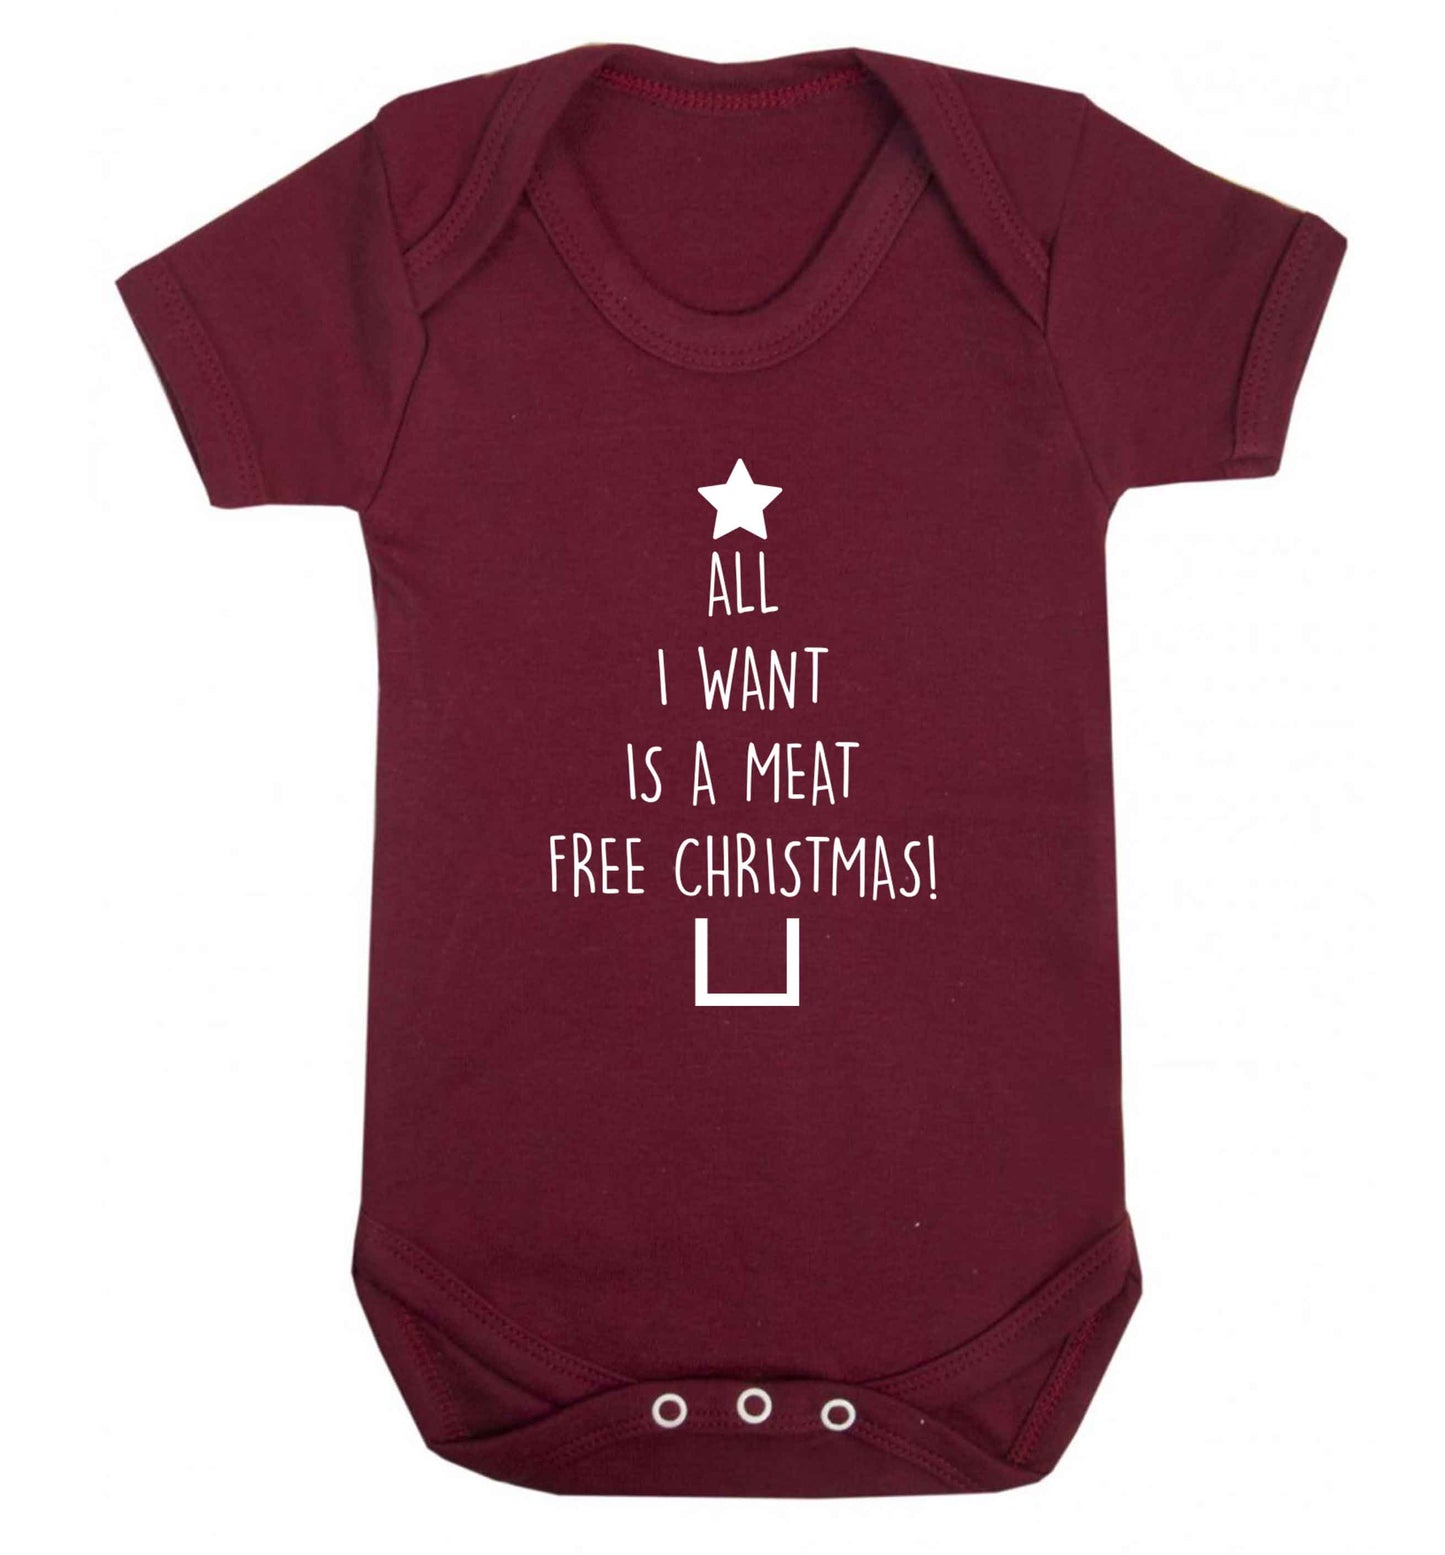 All I want is a meat free Christmas Baby Vest maroon 18-24 months